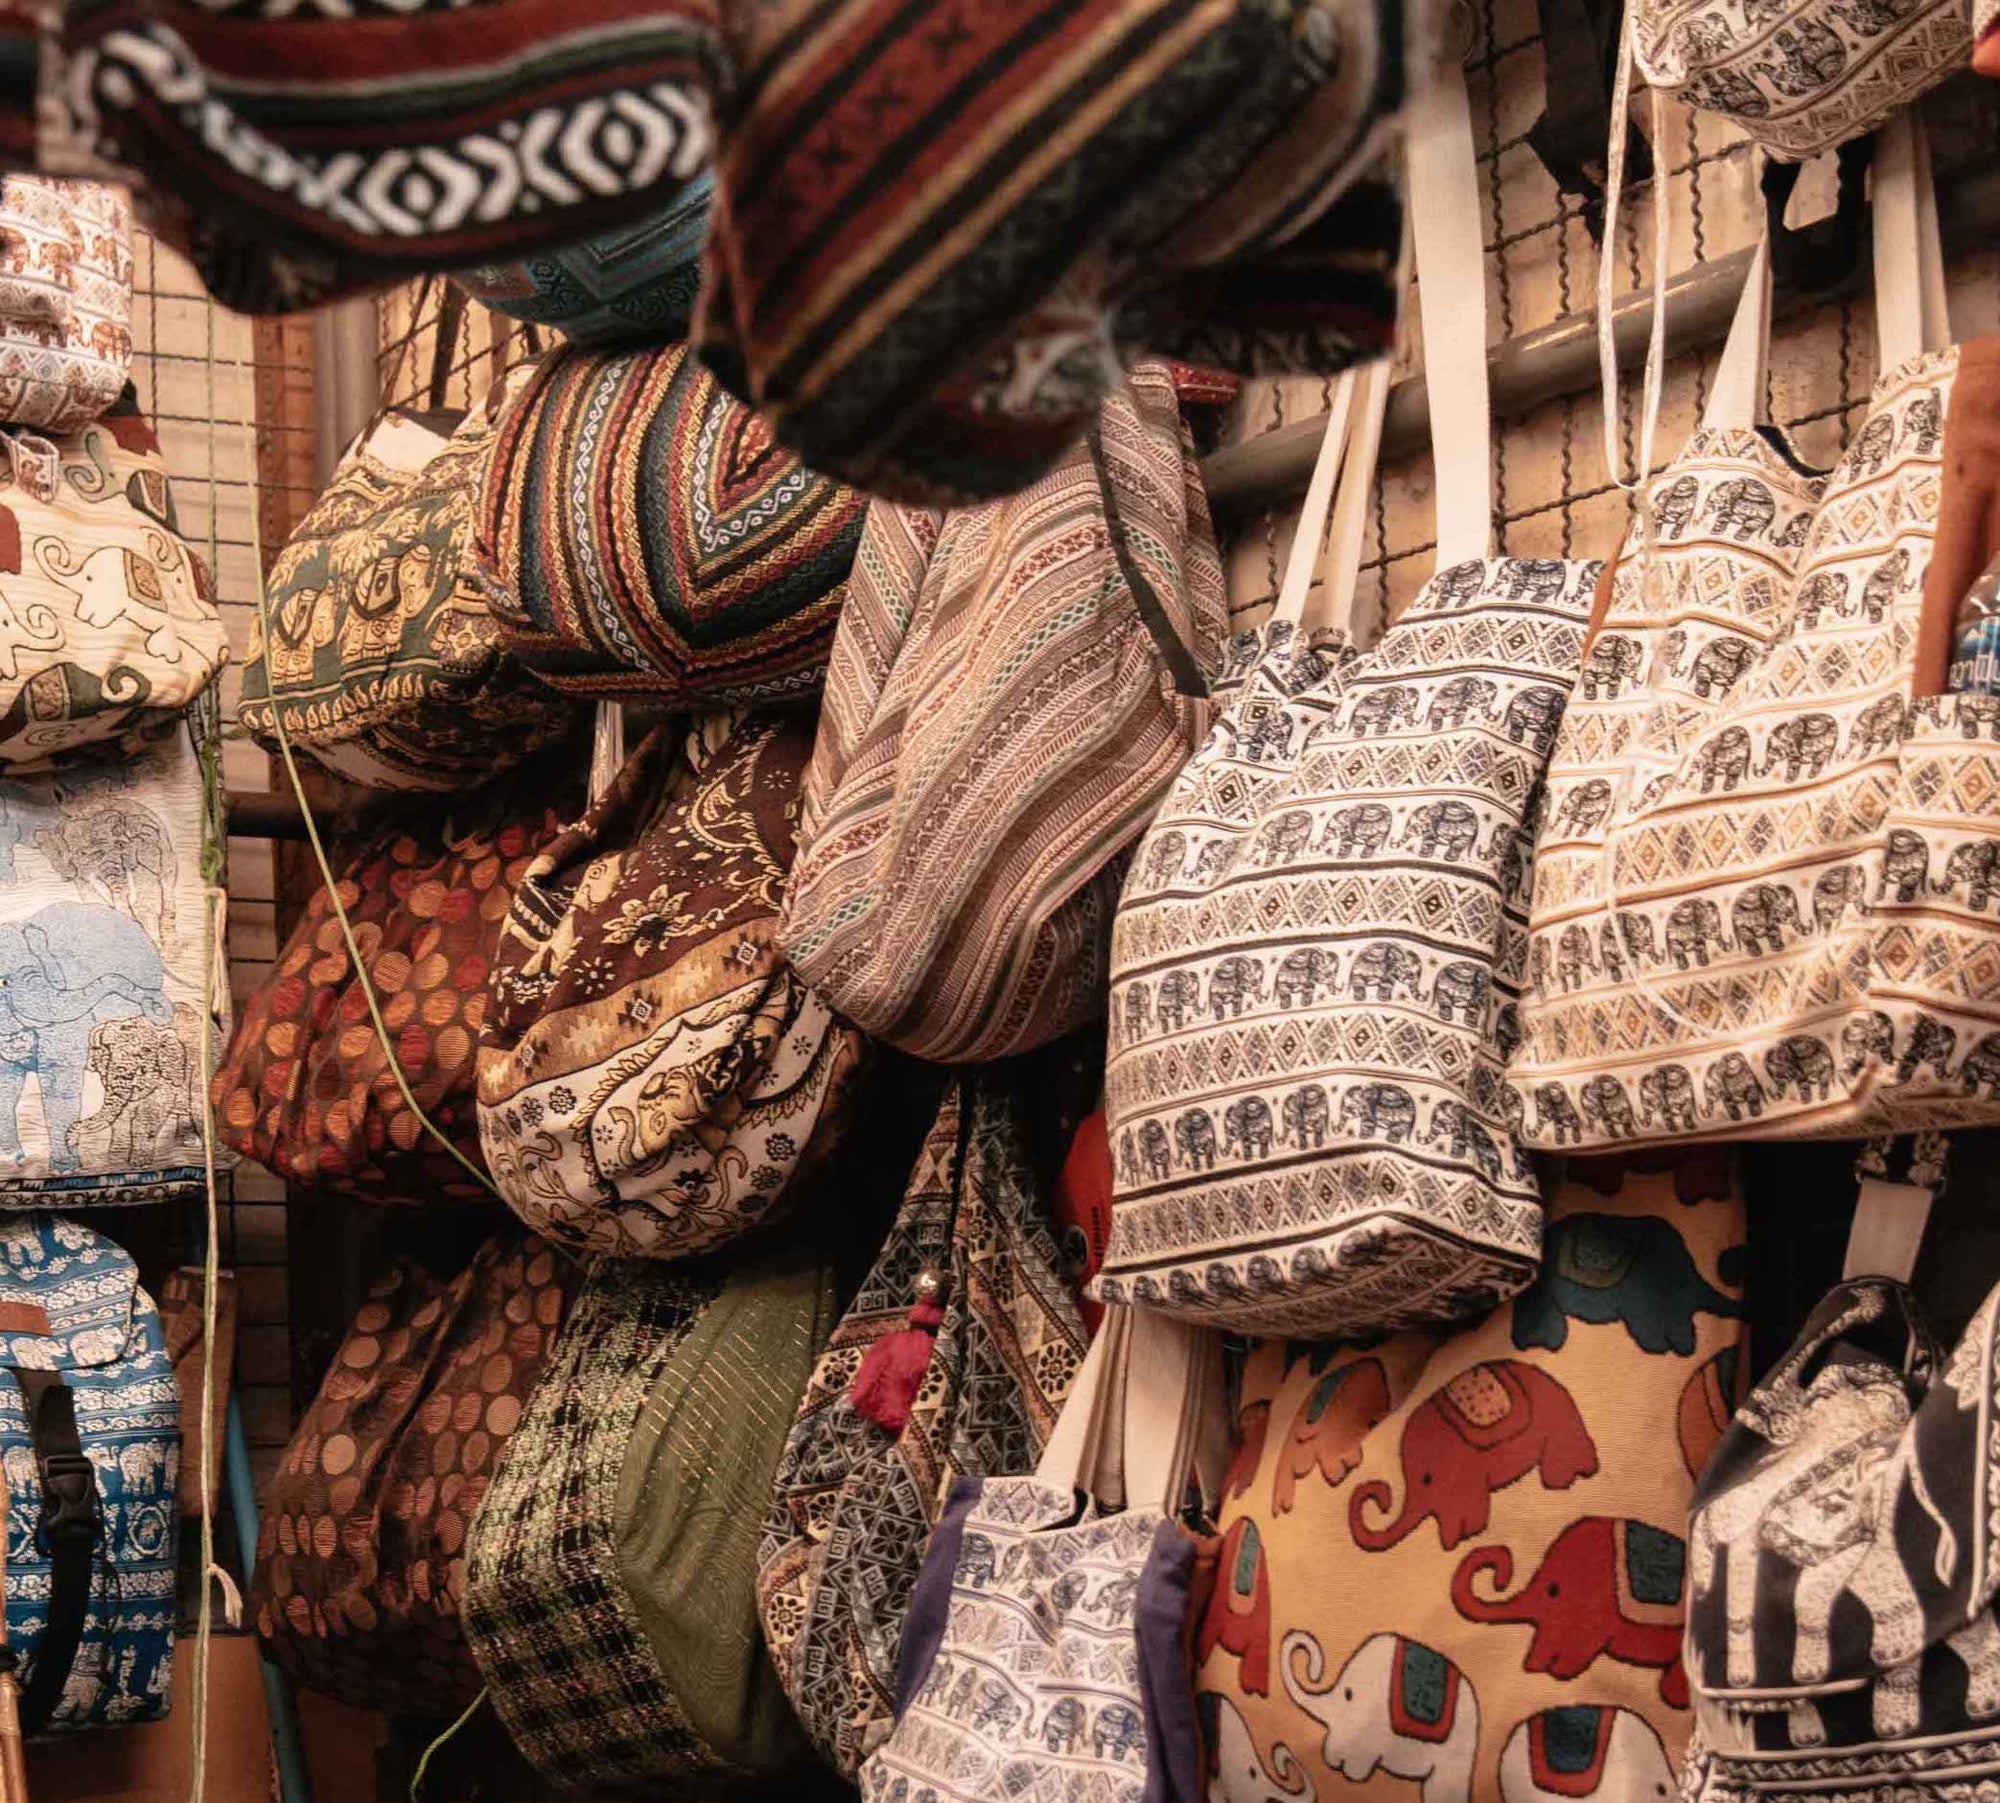 Bags on the wall in market stall in Thailand